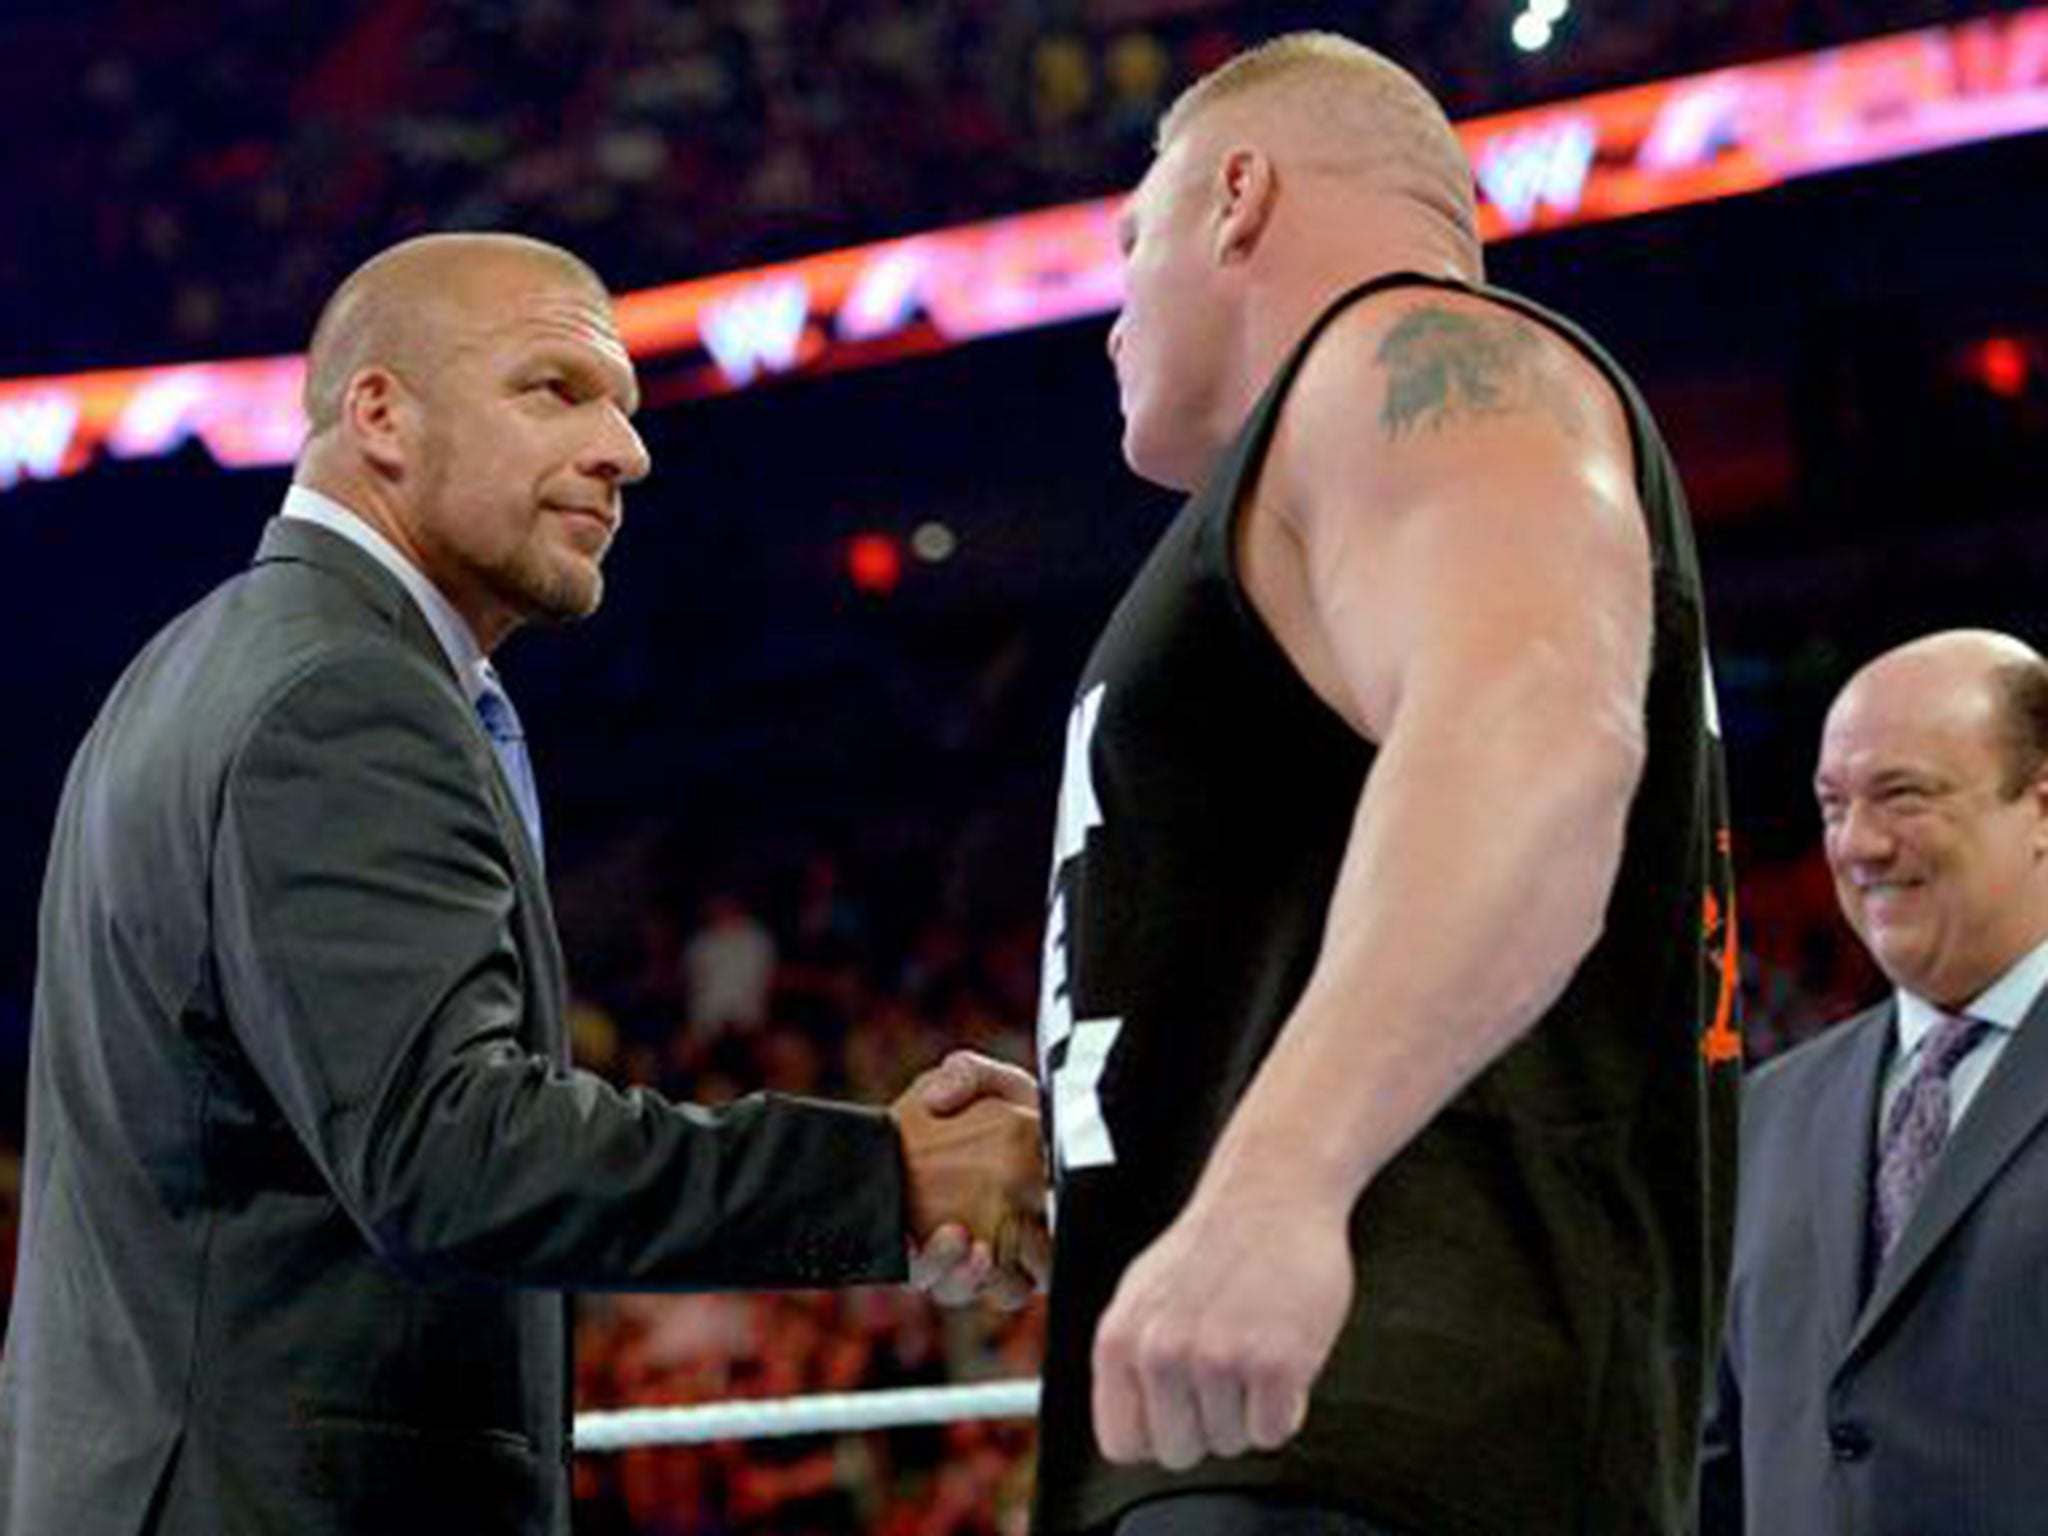 Triple H agrees to name Brock Lesnar as the number one contender to John Cena's WWE World Heavyweight title